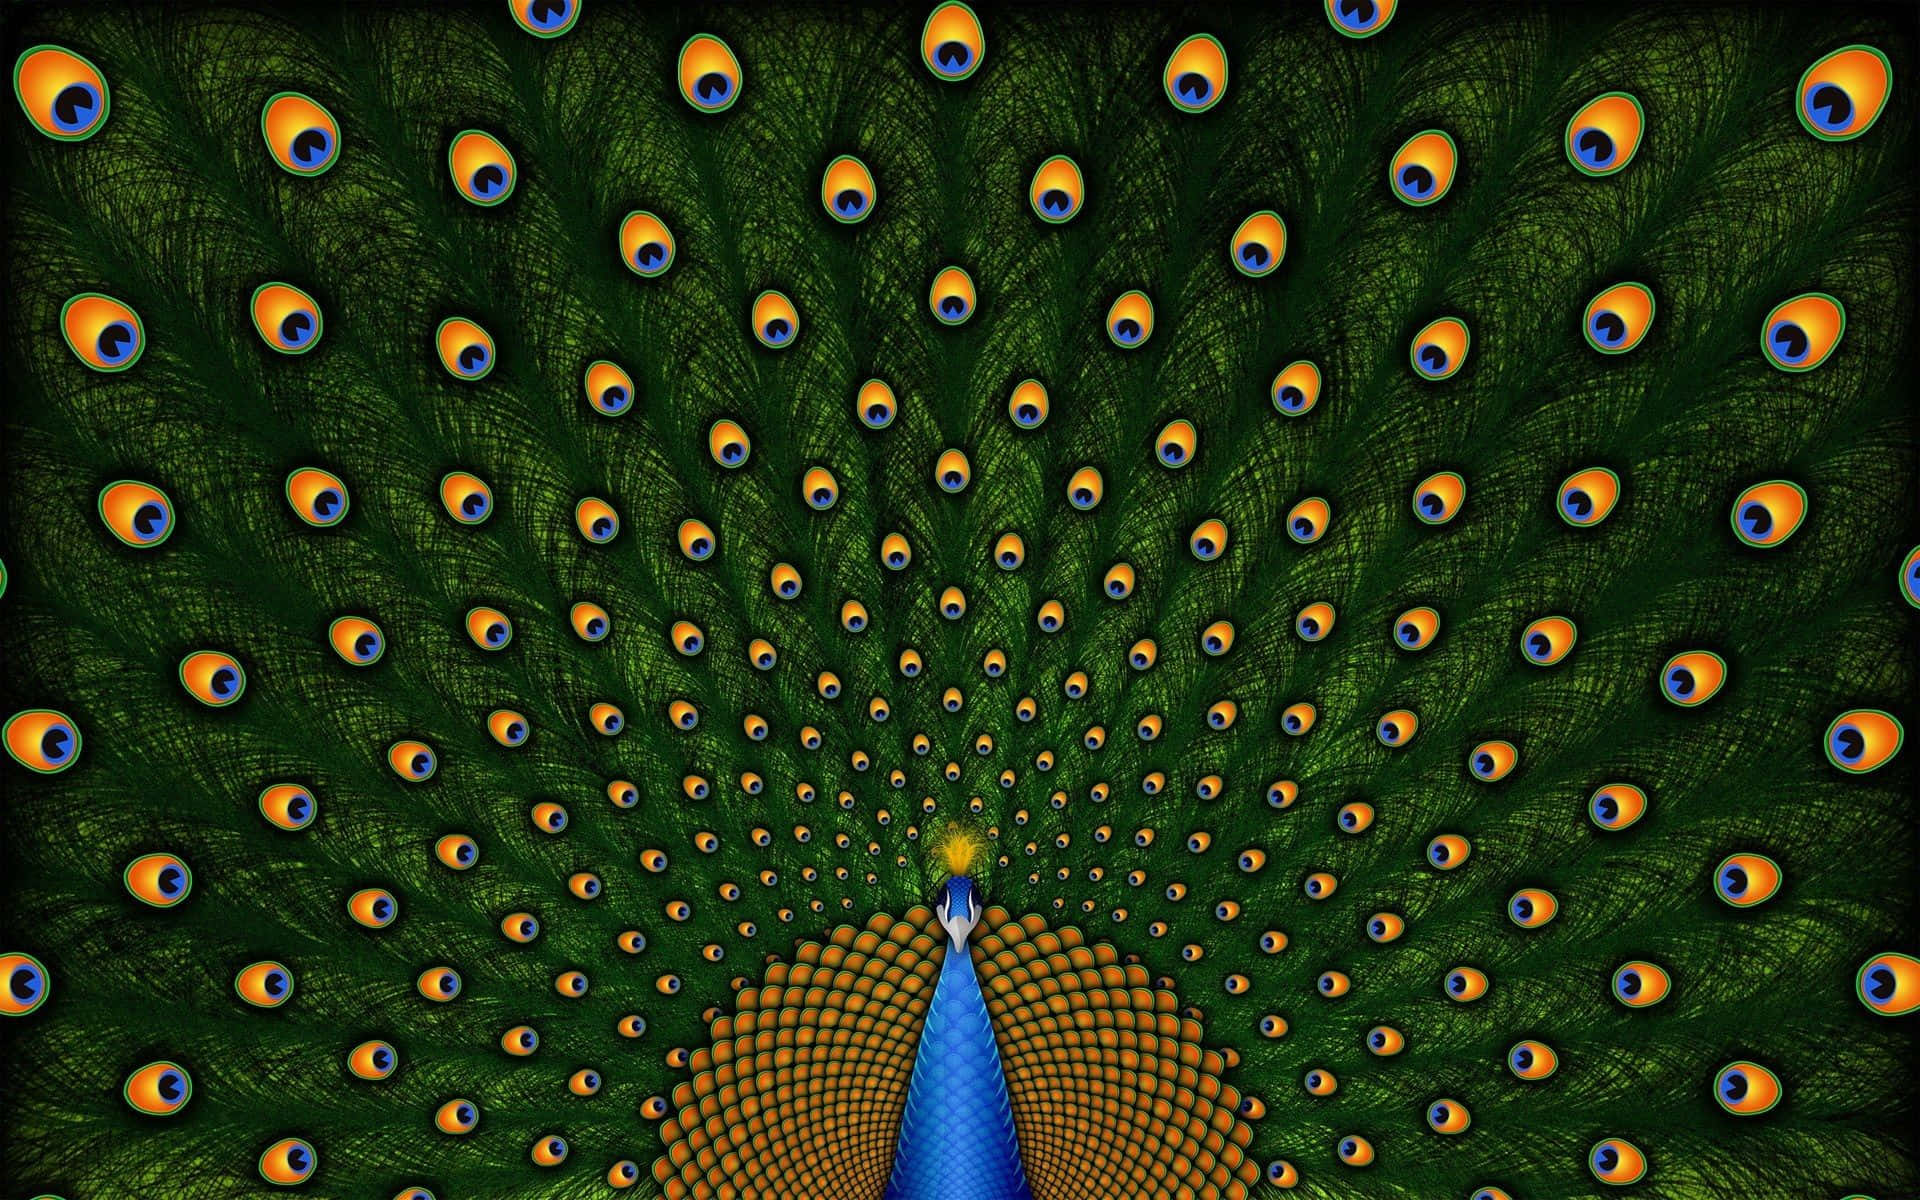 Image  Brightly Colored Peacock Showing its Feathers